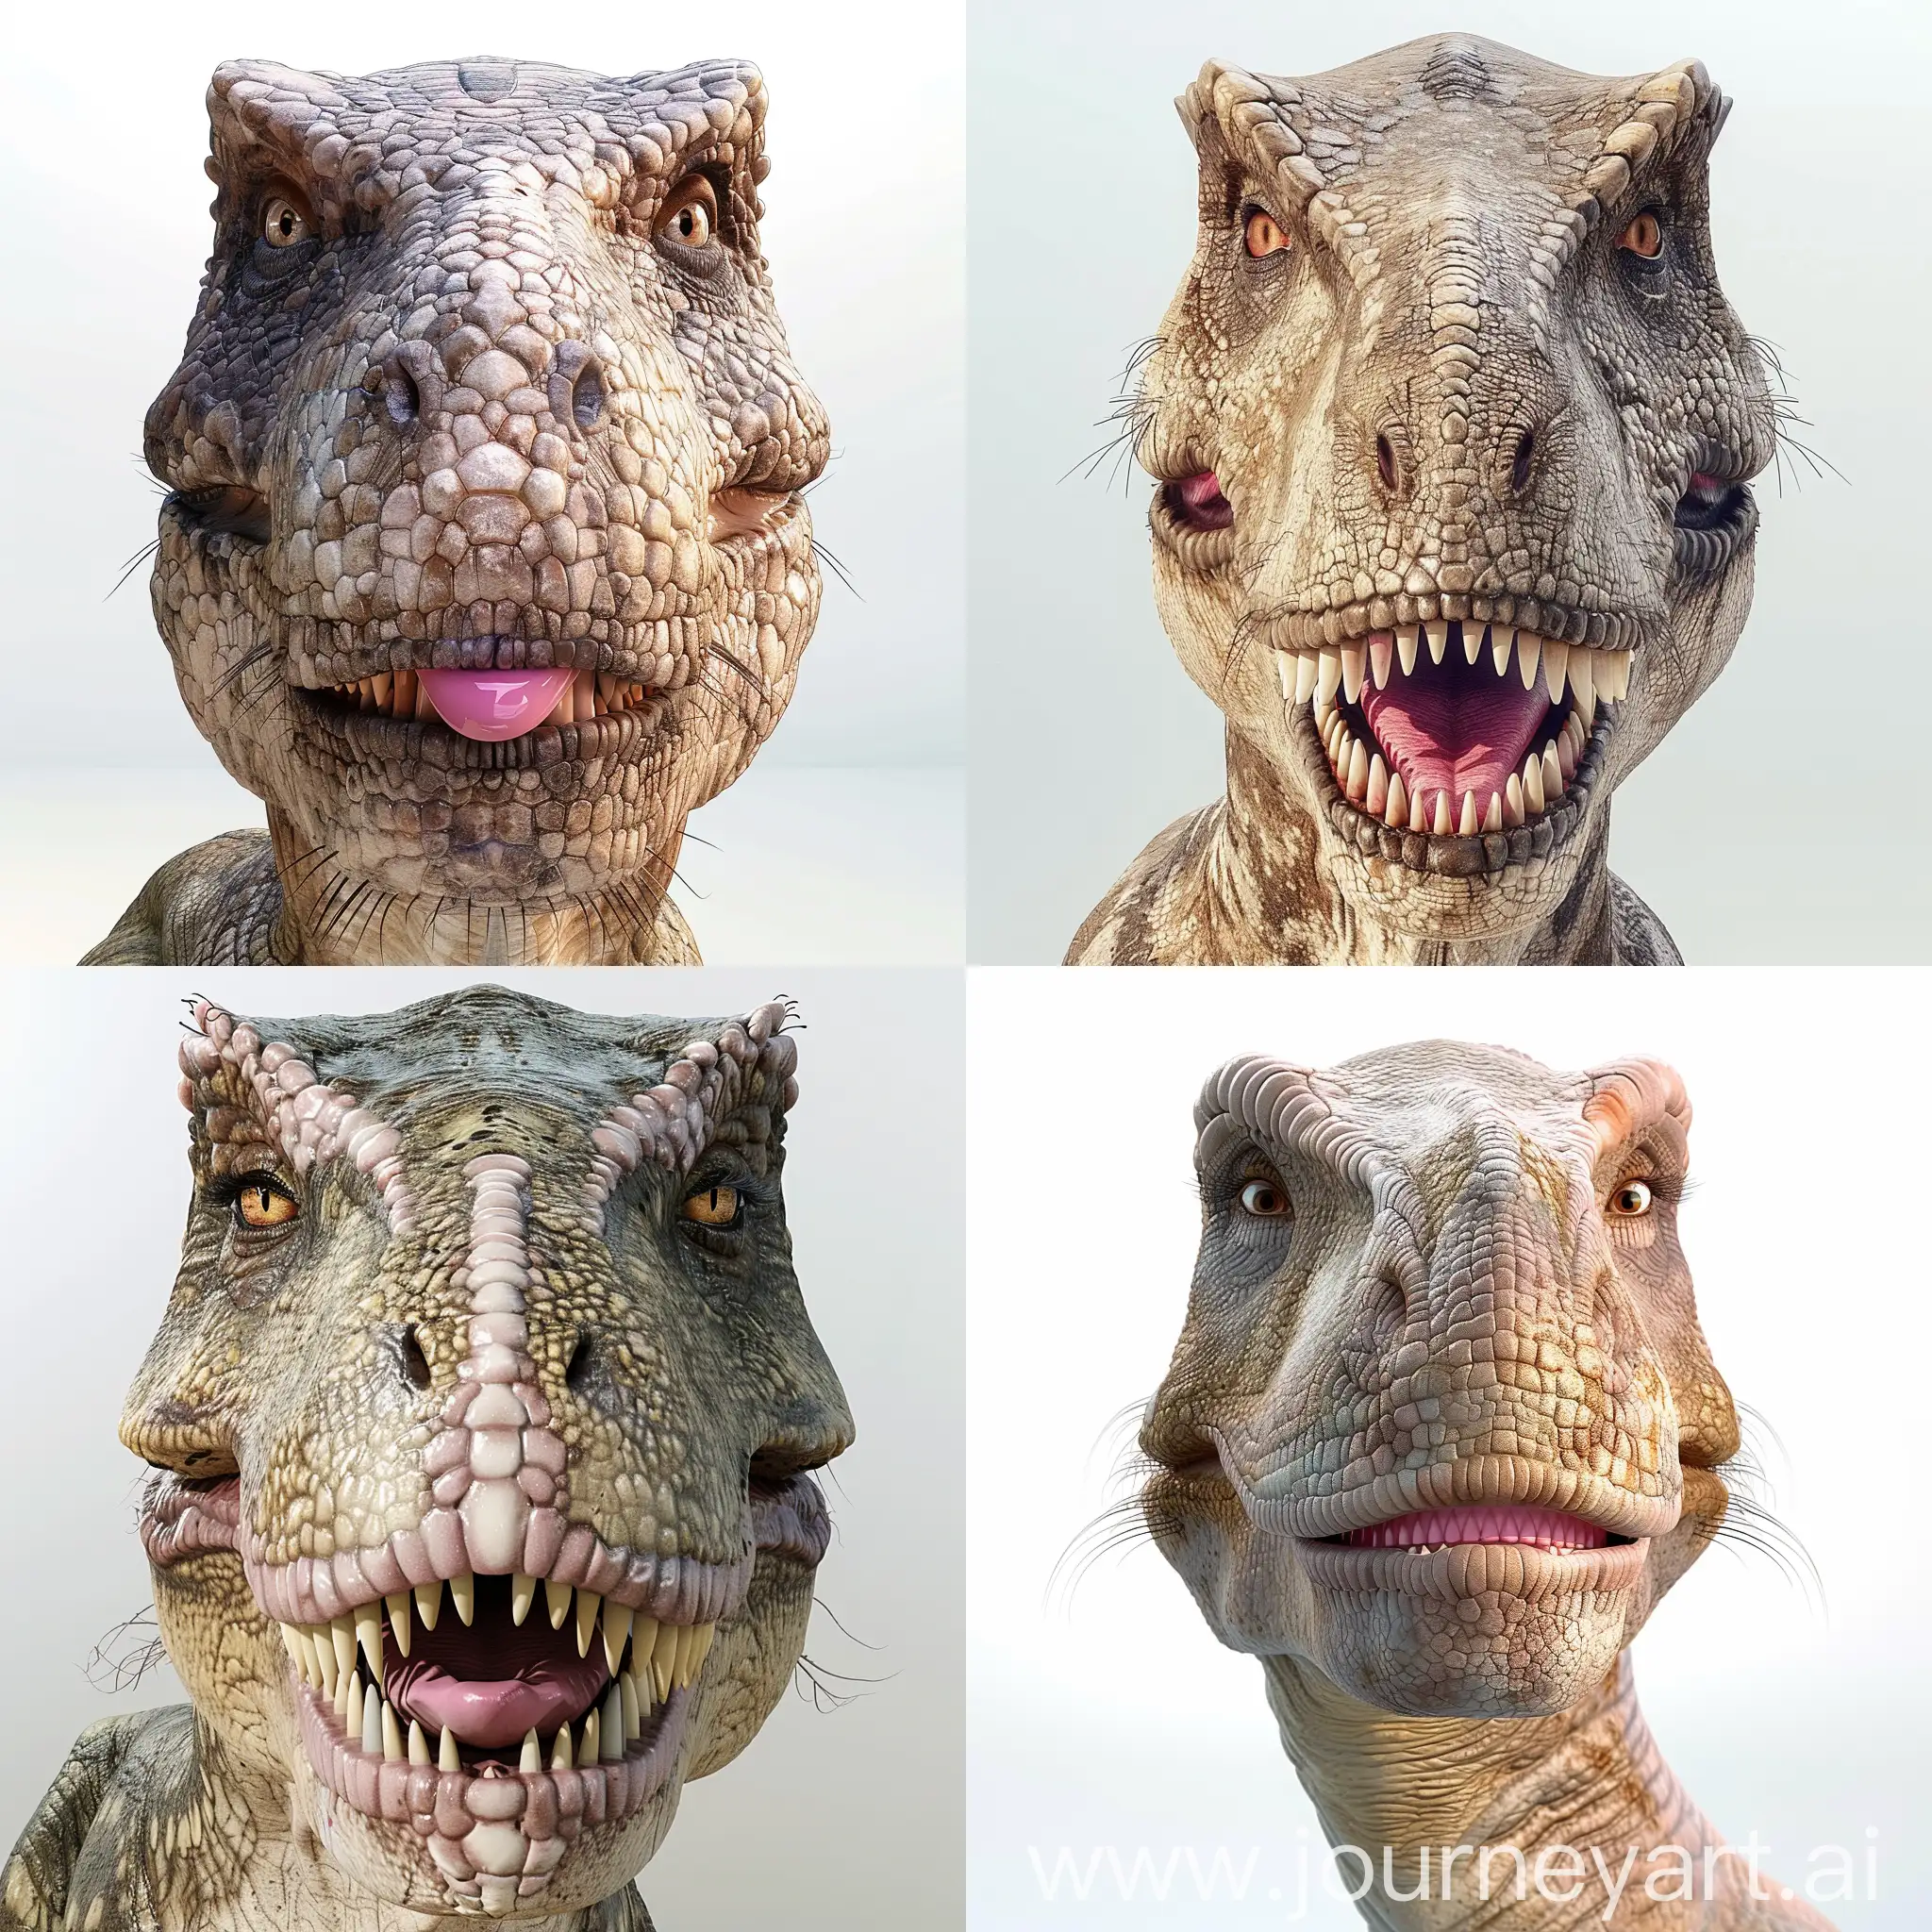 Realistic 3D image of a Tyrannosaurus rex, with a bad face, with perspective looking straight ahead, you can see its entire face and neck and has pink lipstick, with long eyelashes and the background of the image is white